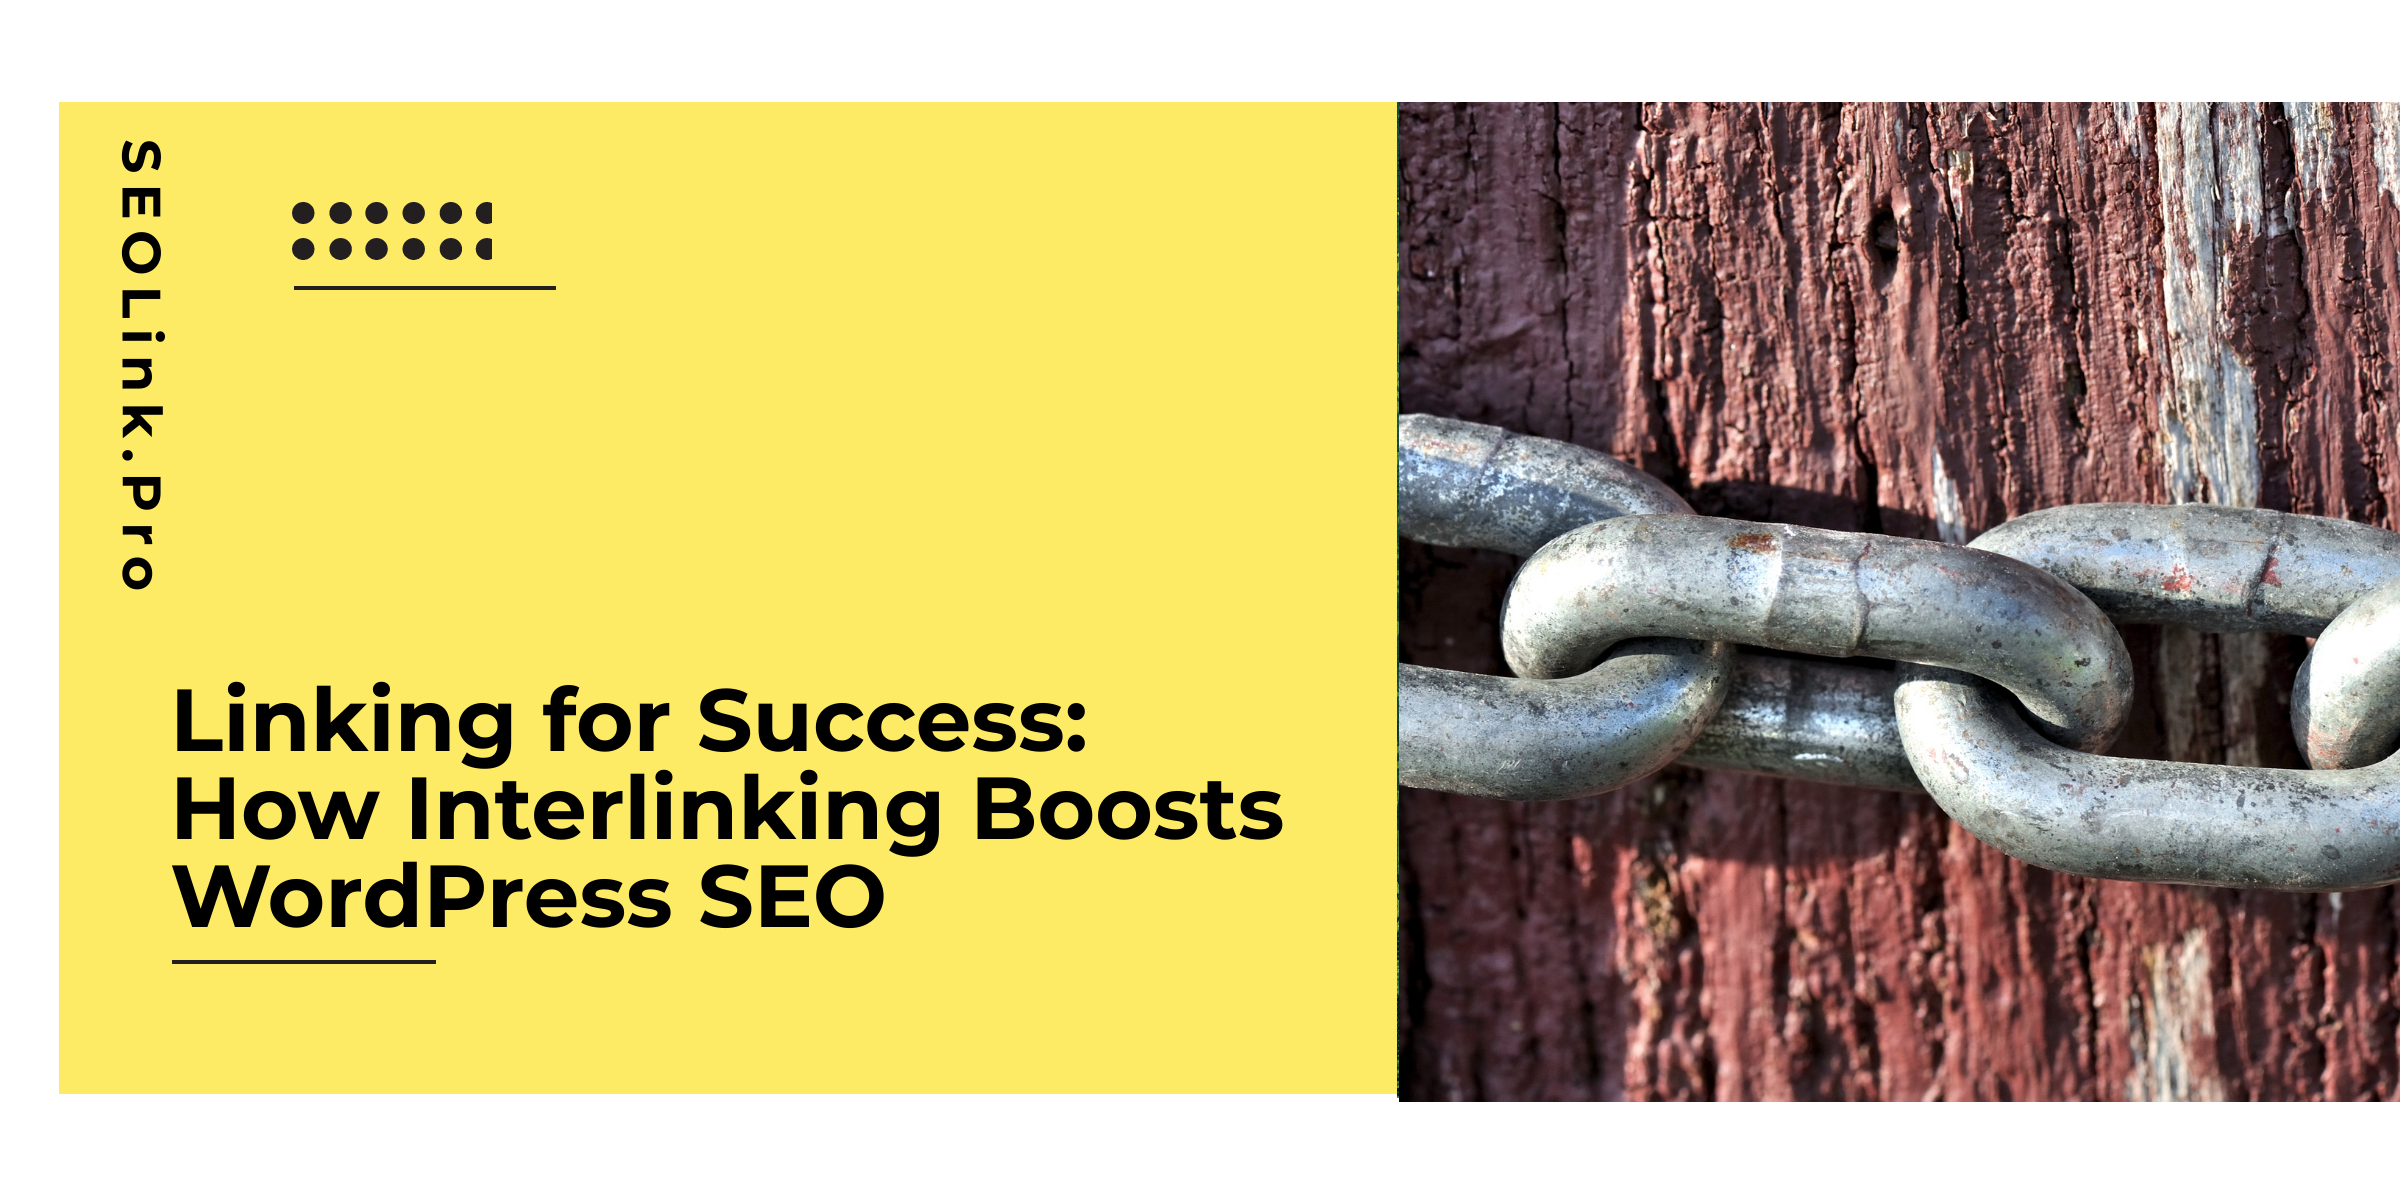 Linking for Success: How Interlinking Boosts WordPress SEO